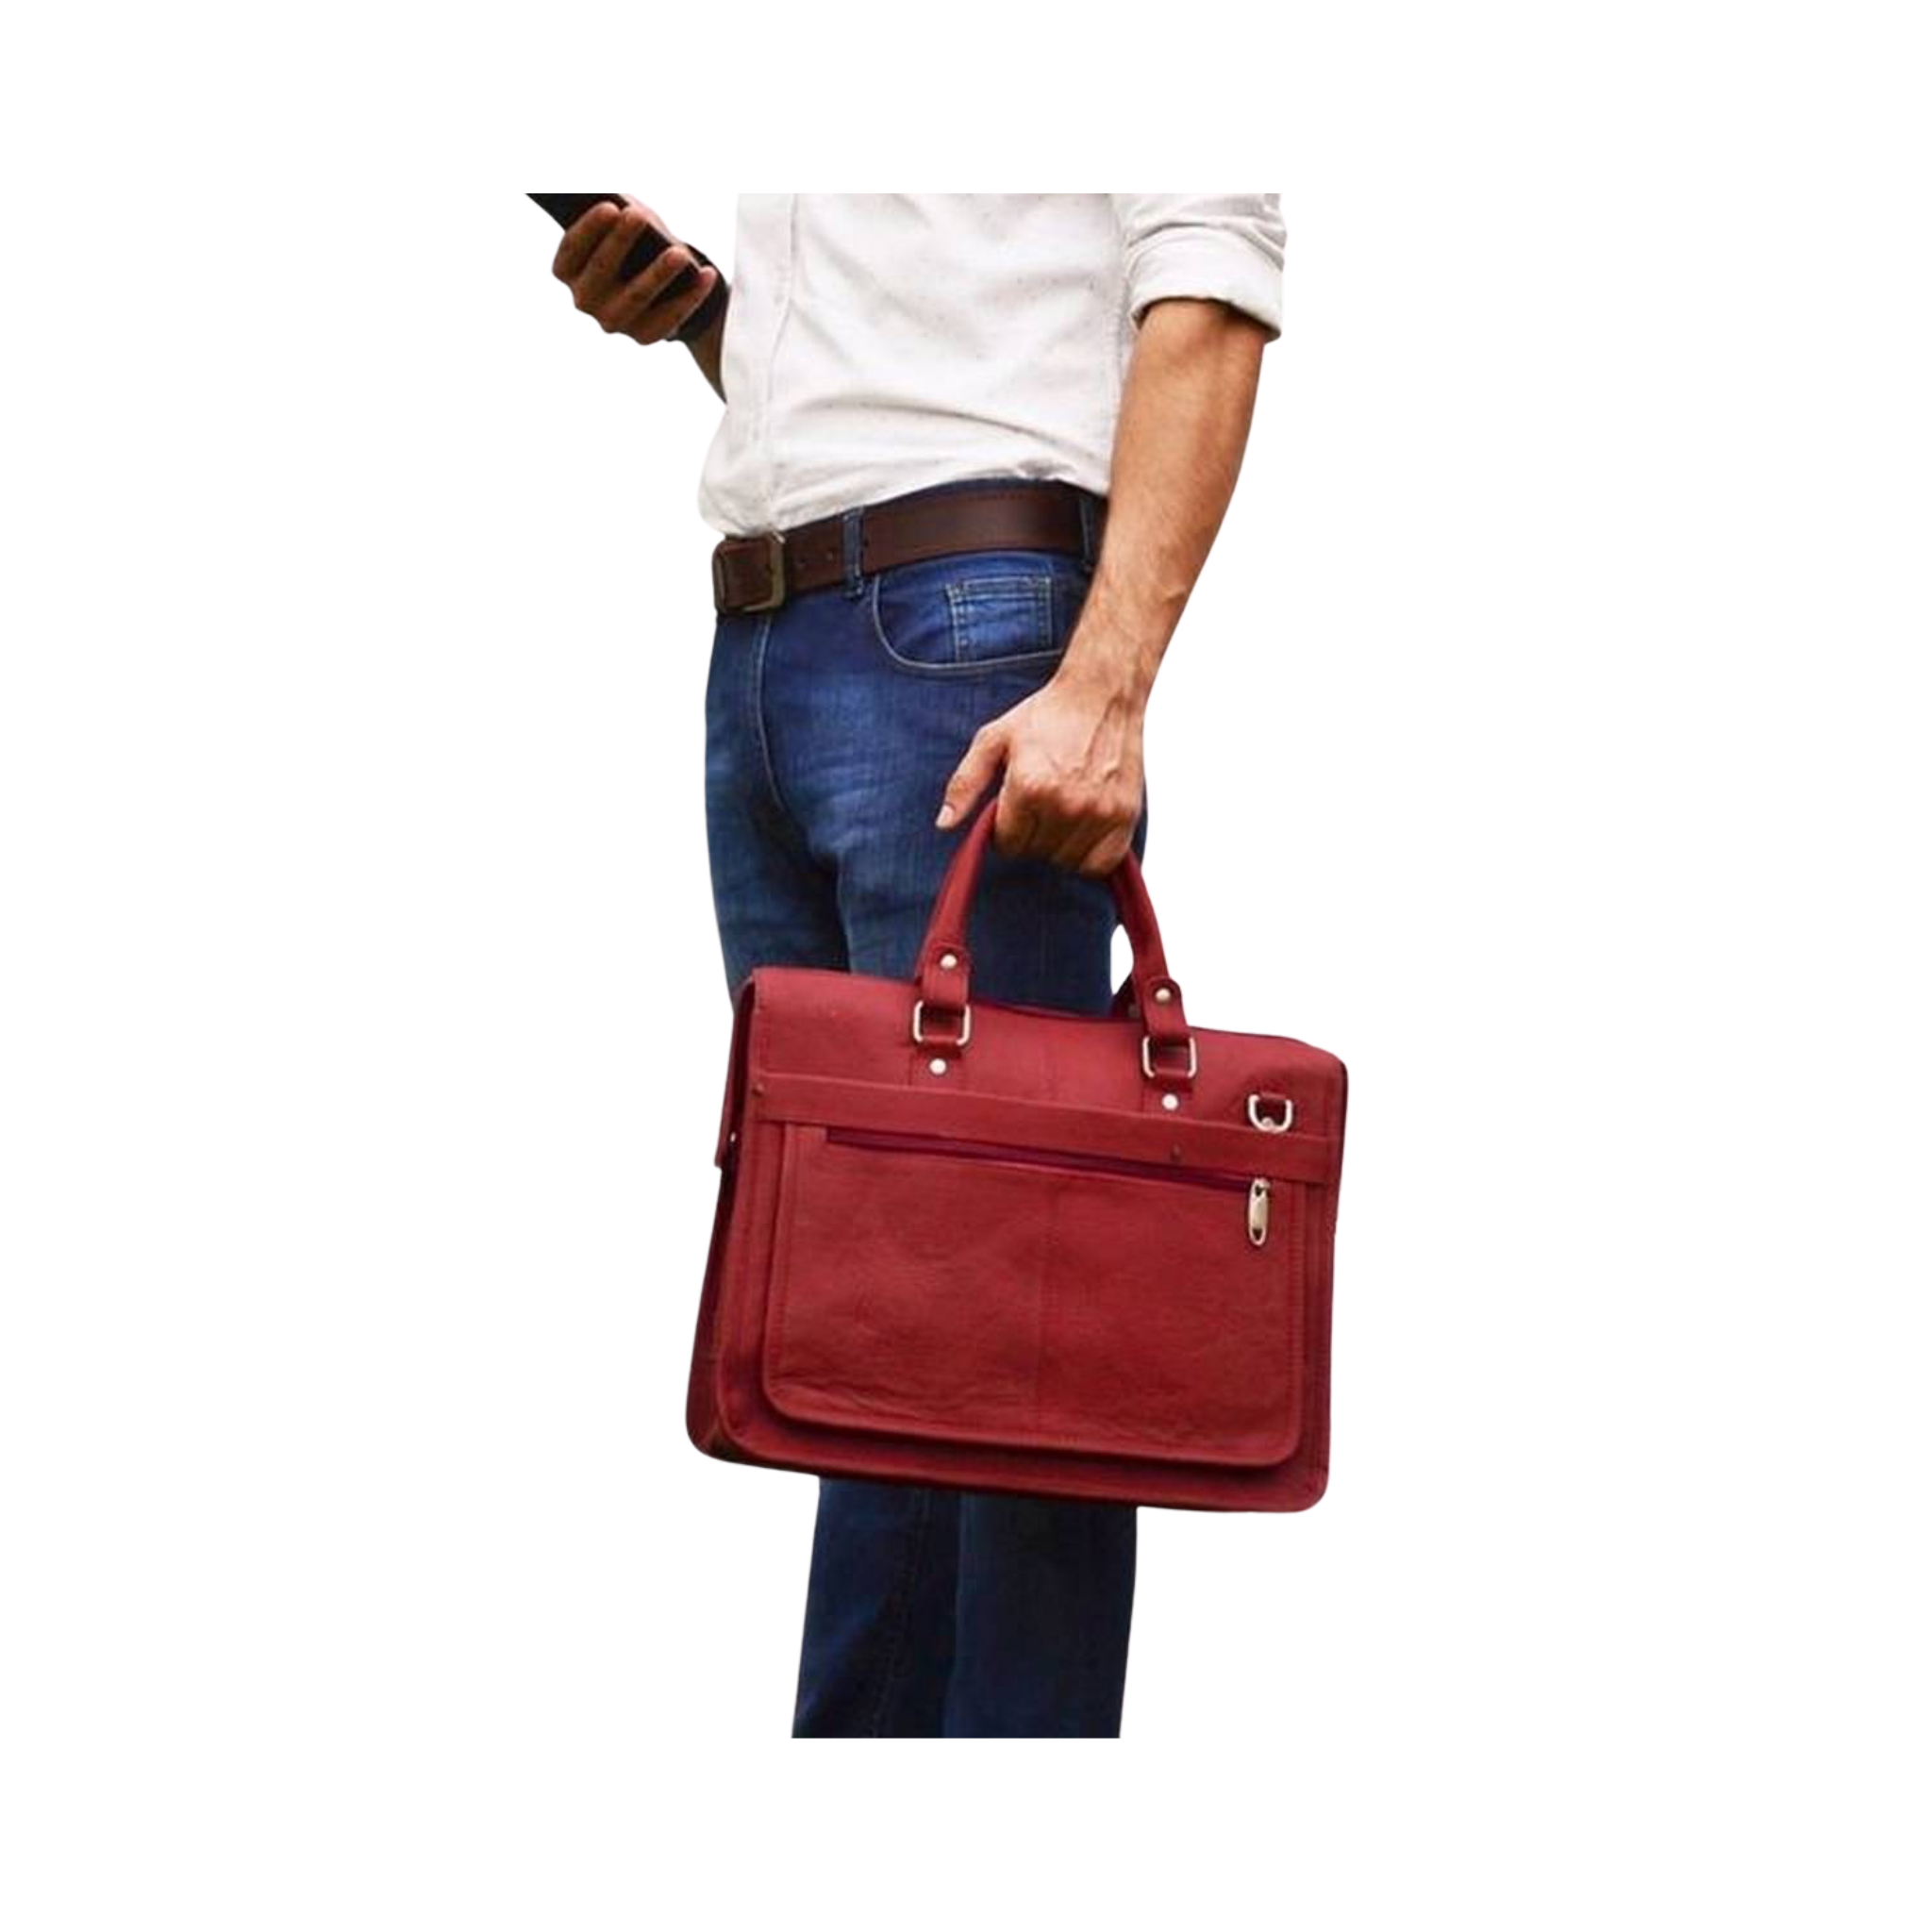 Business Bag, Best For Working & Business Professionals